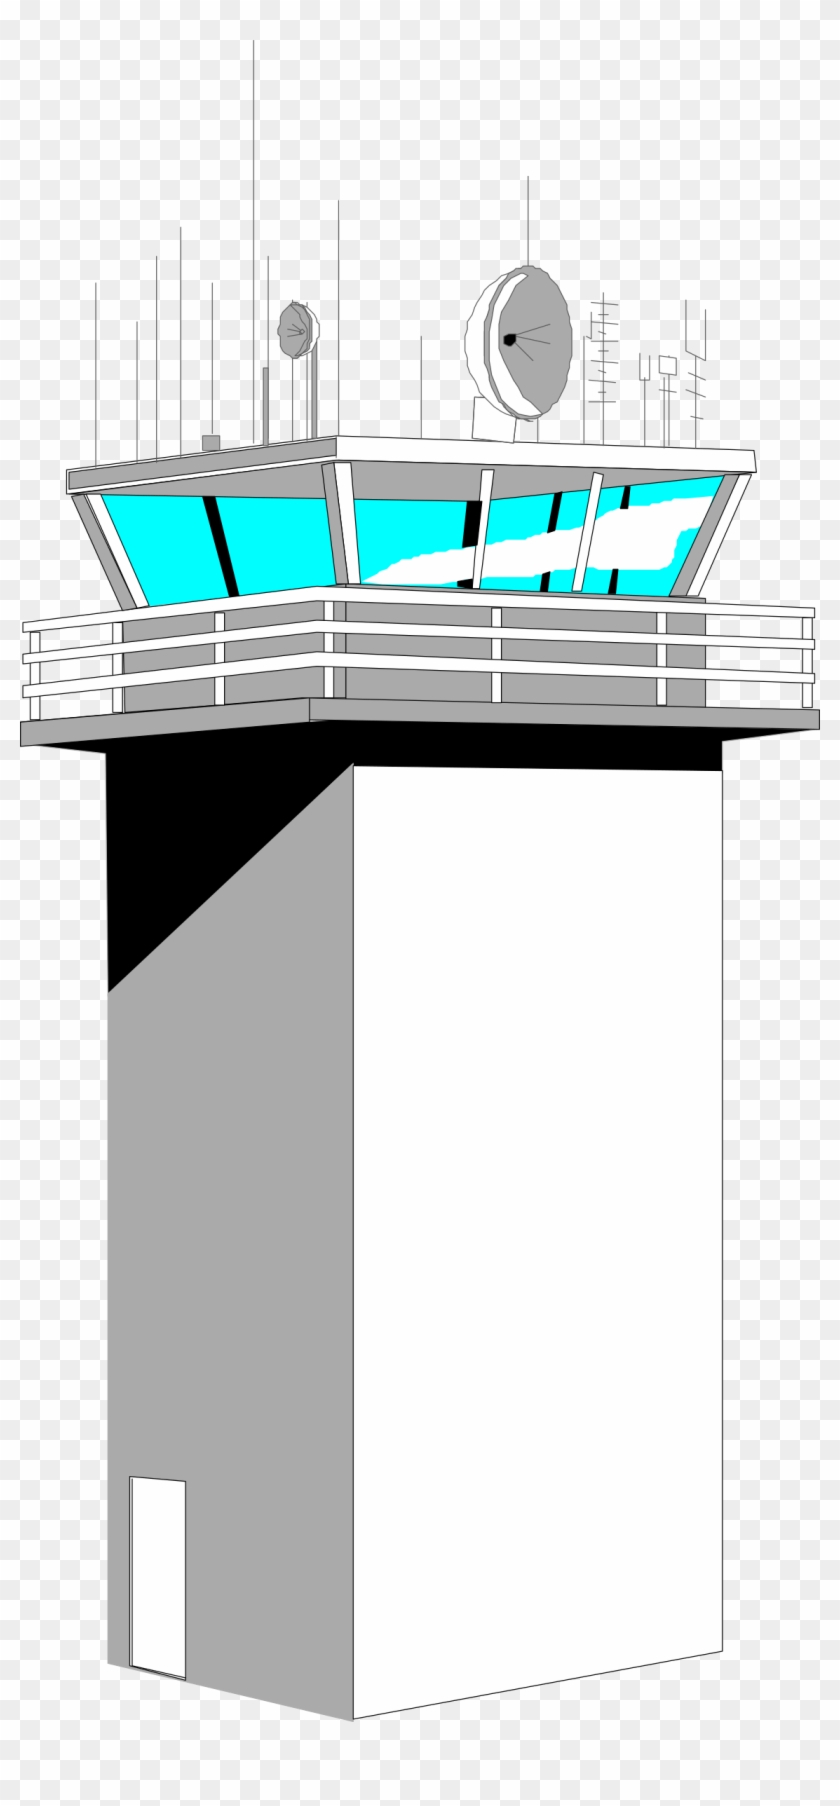 This Free Icons Png Design Of Airport Control Tower Clipart #770897